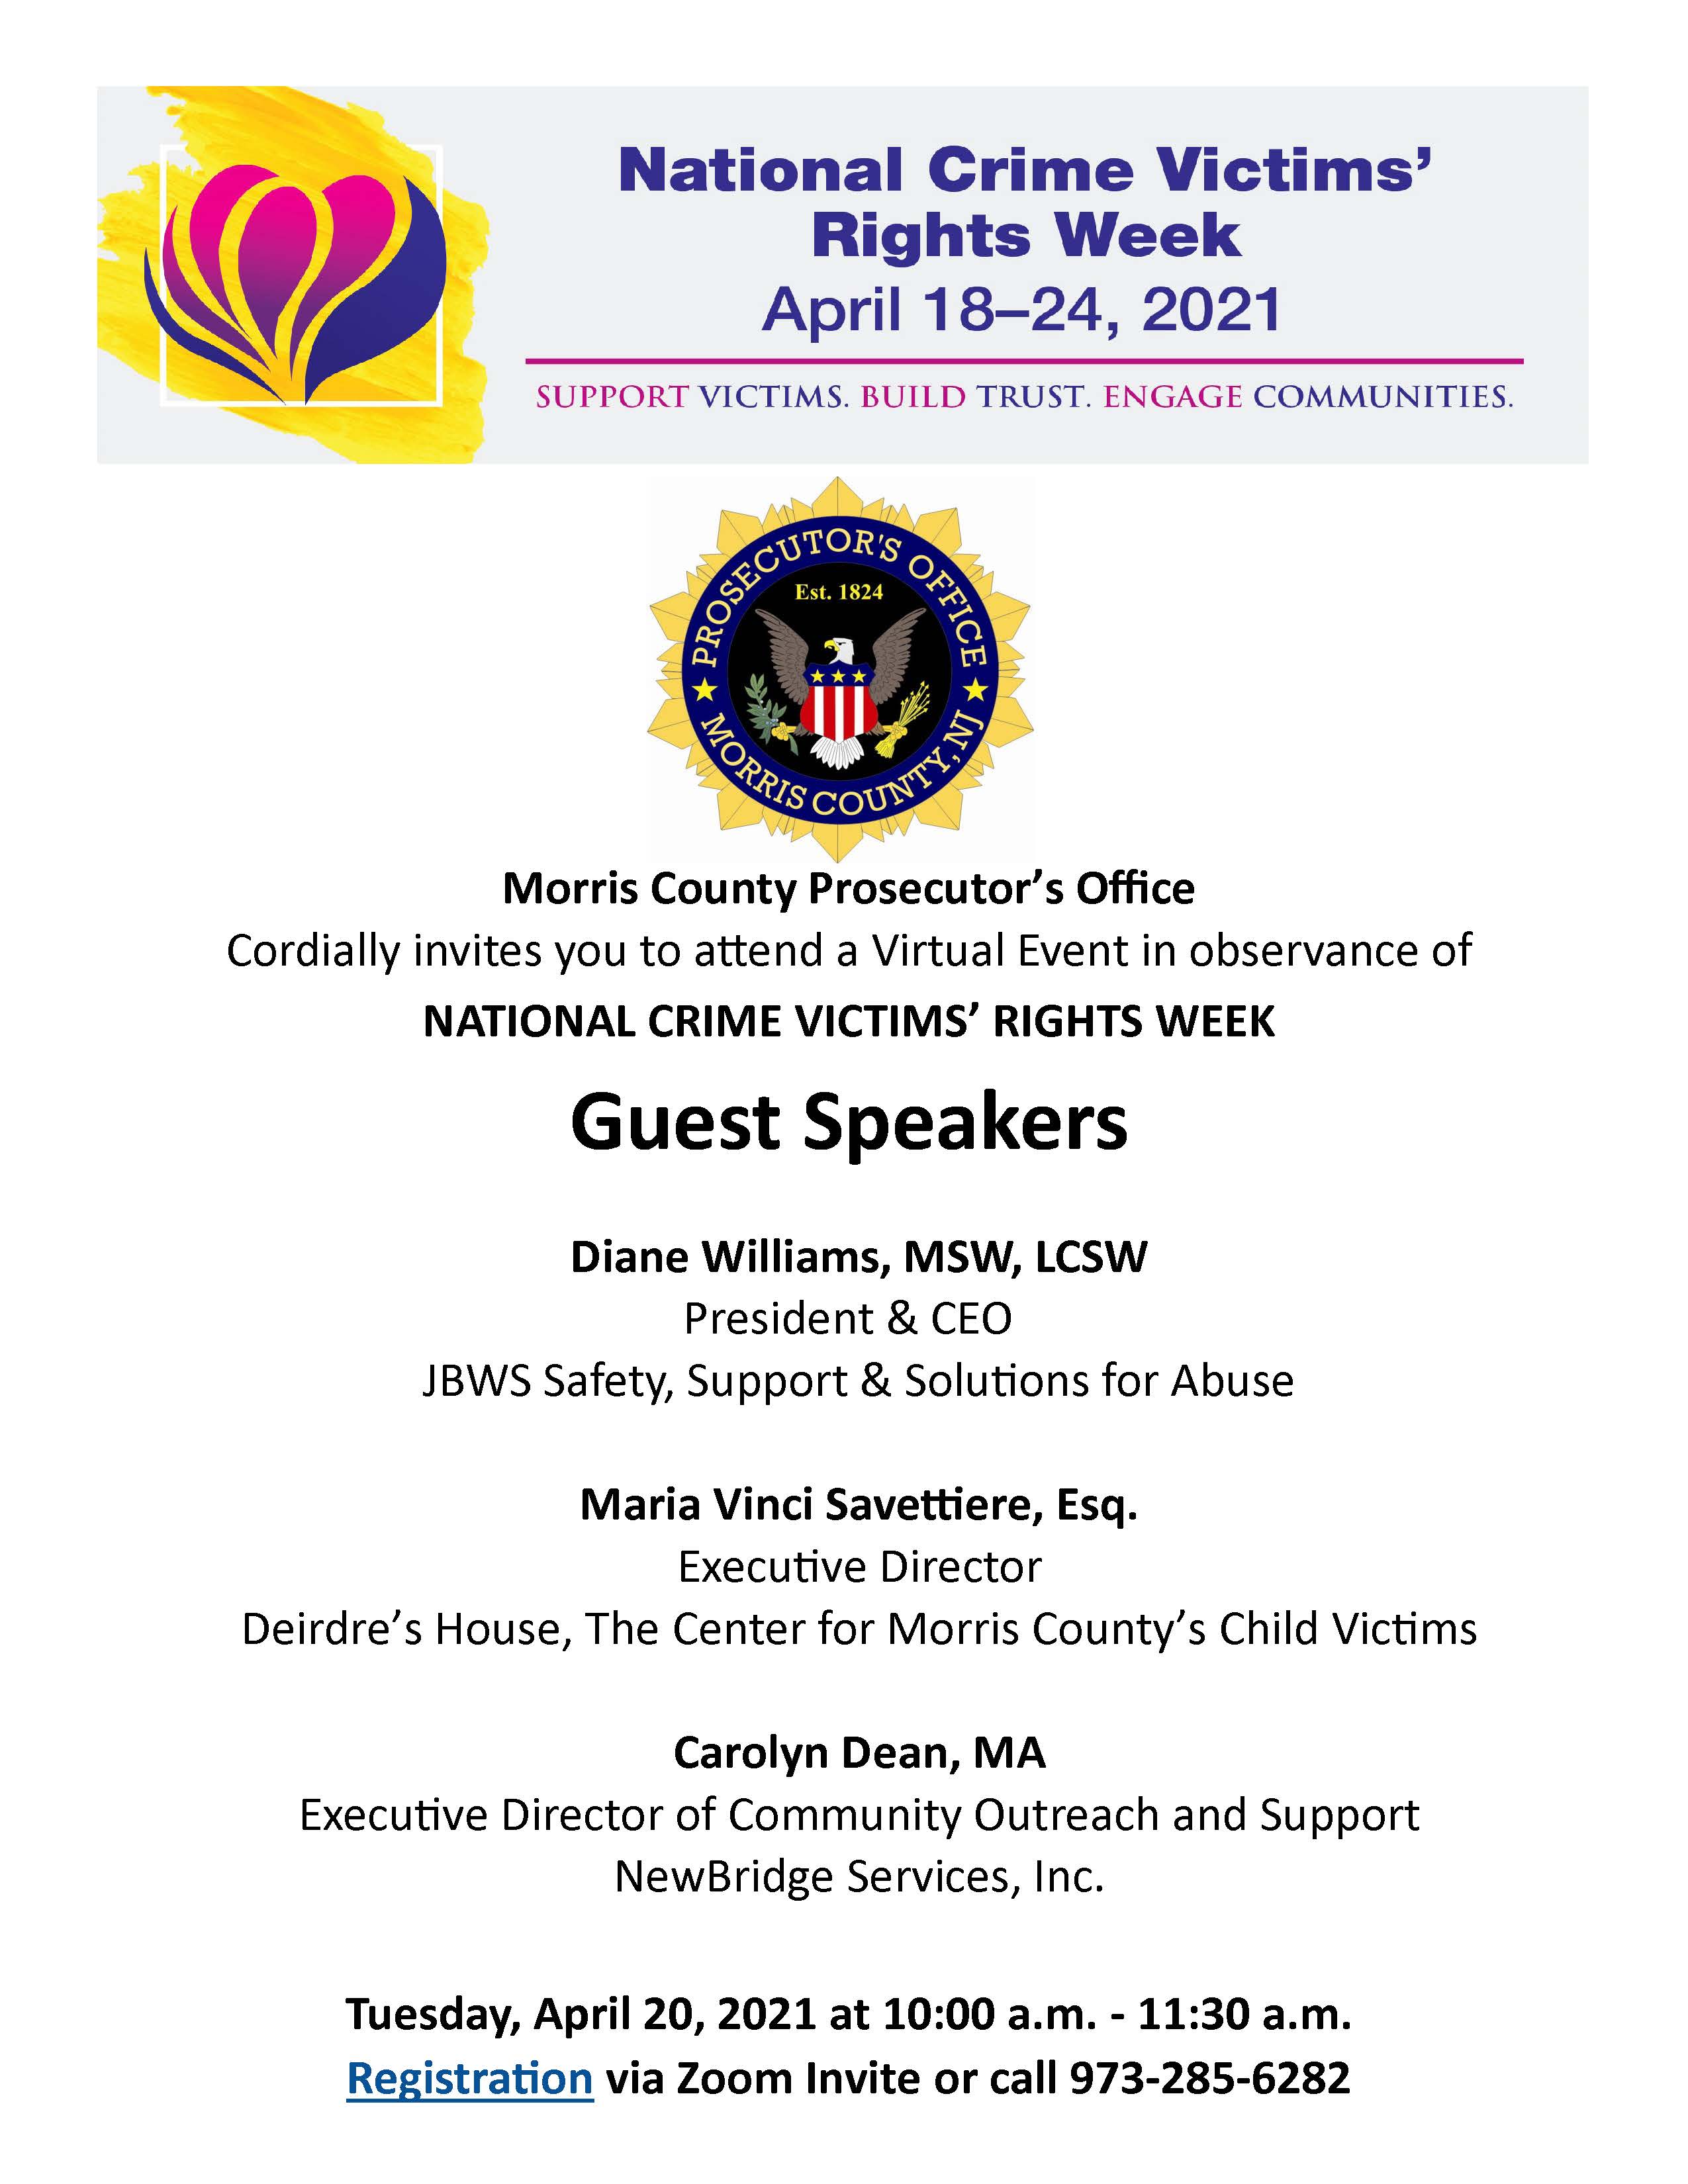 Morris County Prosecutor's Office Presents 2021 Crime Victims' Rights Week Virtual Event Flyer (002).jpg